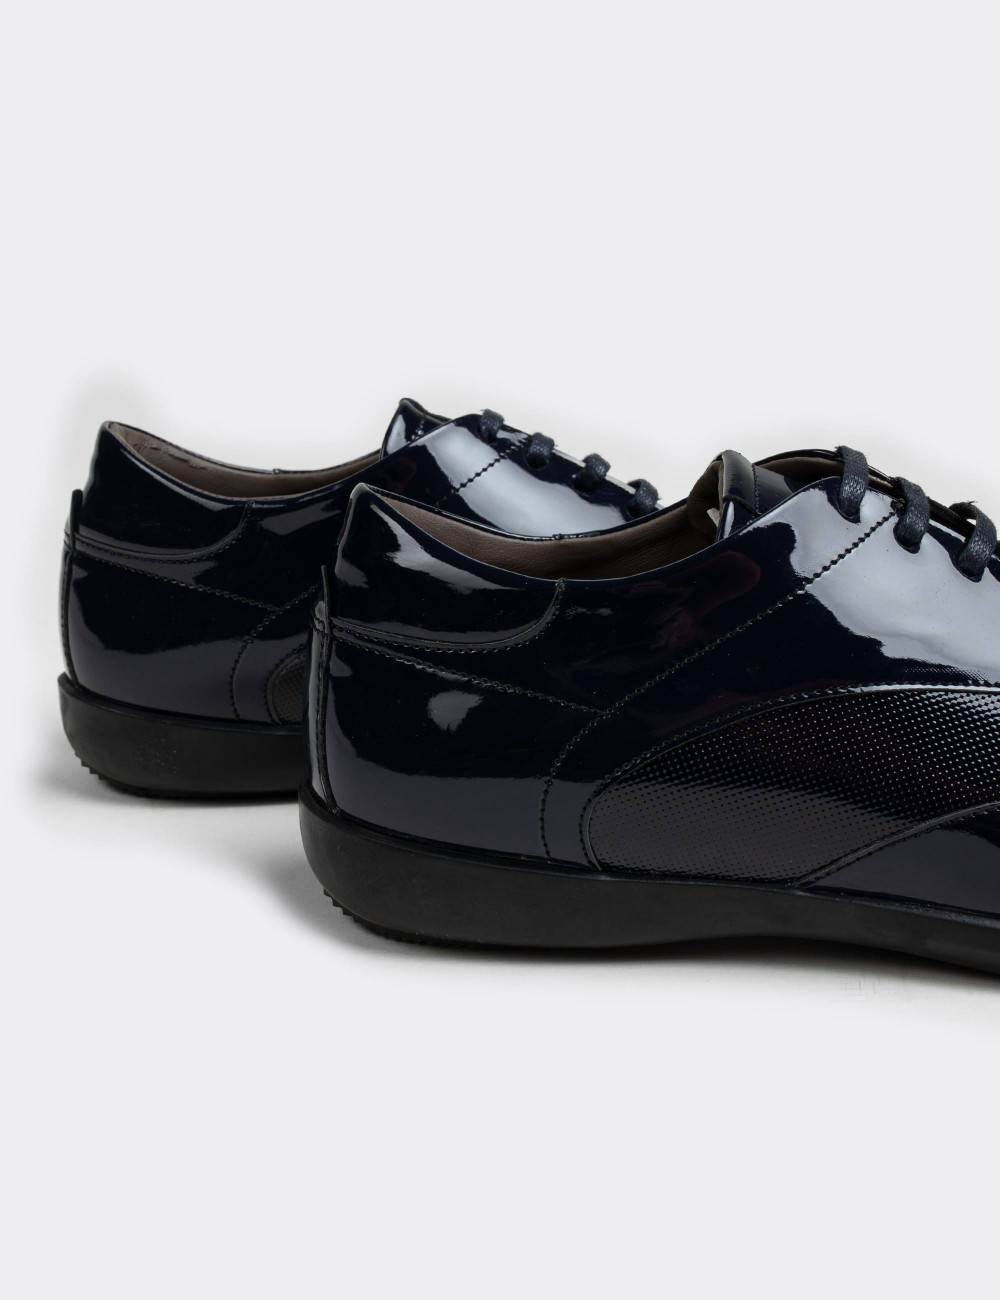 Navy Patent Leather Lace-up Shoes - 01686MLCVC01